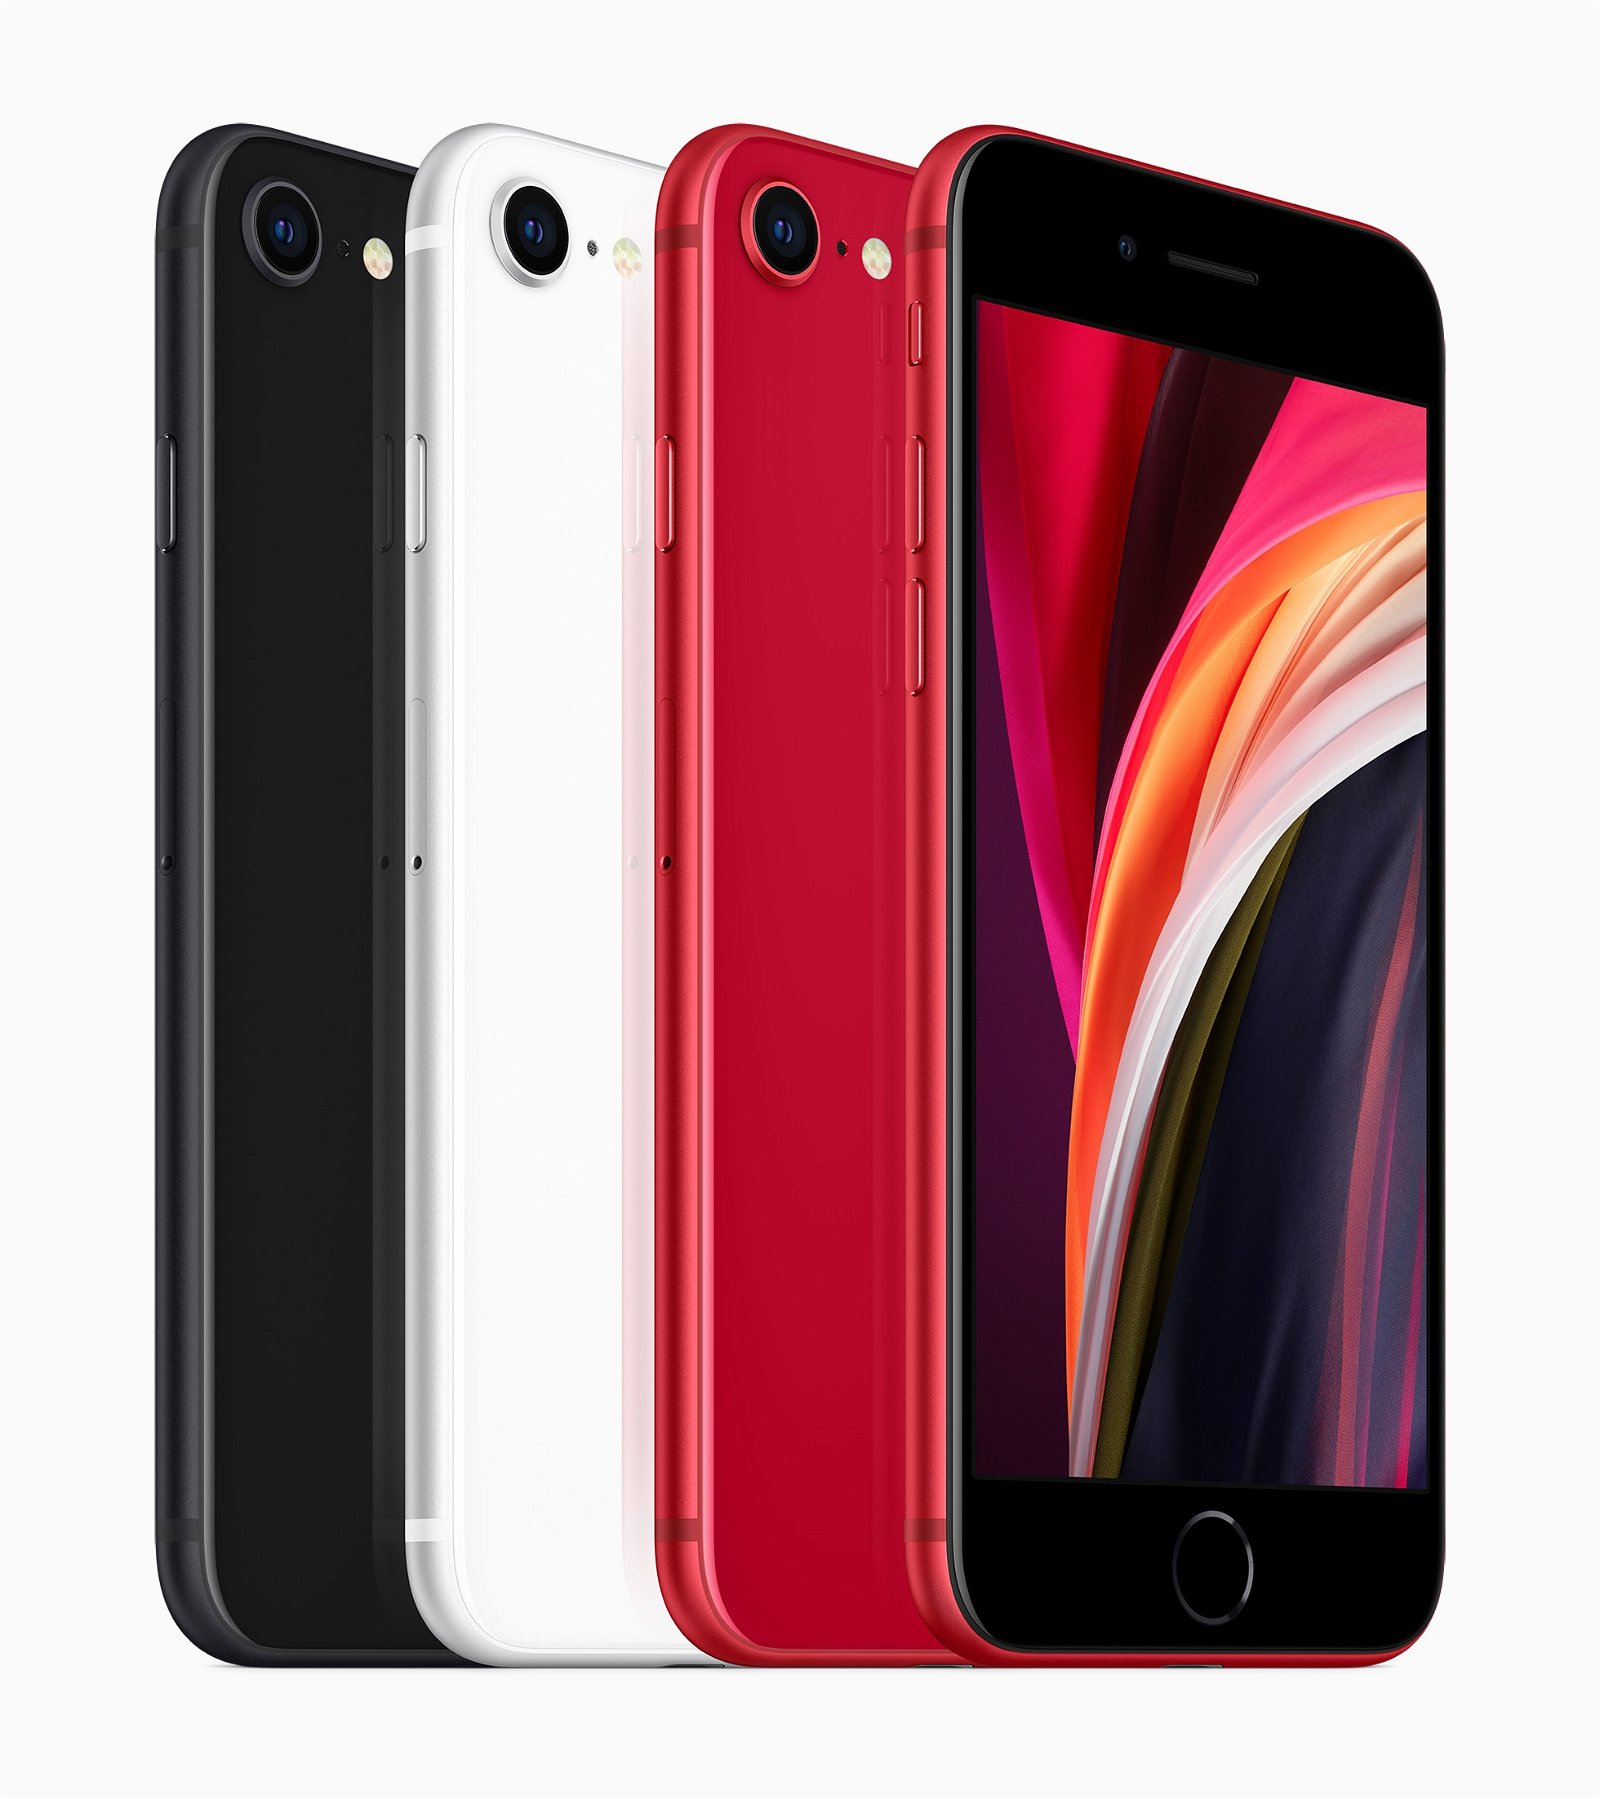 Apple_new-iphone-se-black-white-product-red-colors_04152020